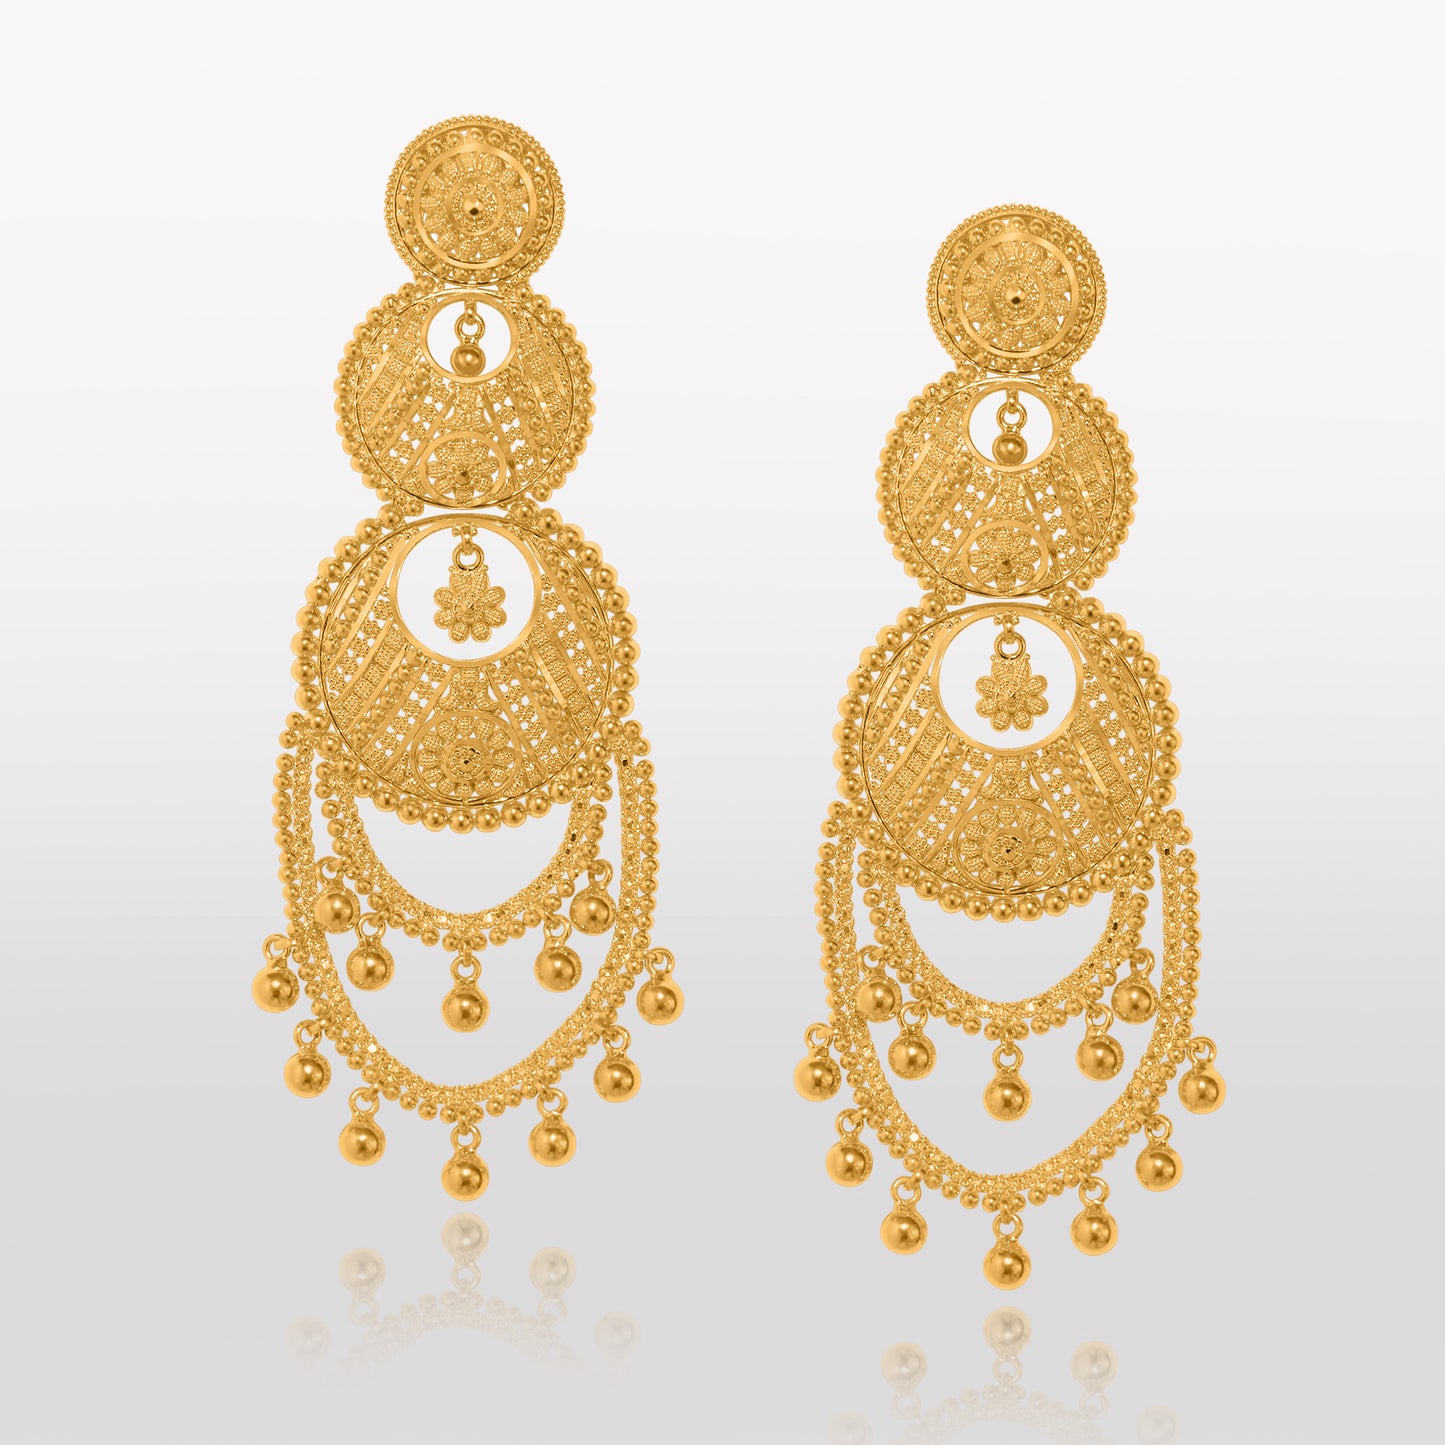 <img src="sahar-heritage-chandbali-earrings.jpg" alt="Sahar Heritage 22k Gold Filligree Chandbali Drop Earrings - a close-up view of exquisitely designed chandbali drop earrings in 22k gold, featuring intricate filligree work and a stunning silhouette that exudes elegance and sophistication."/>